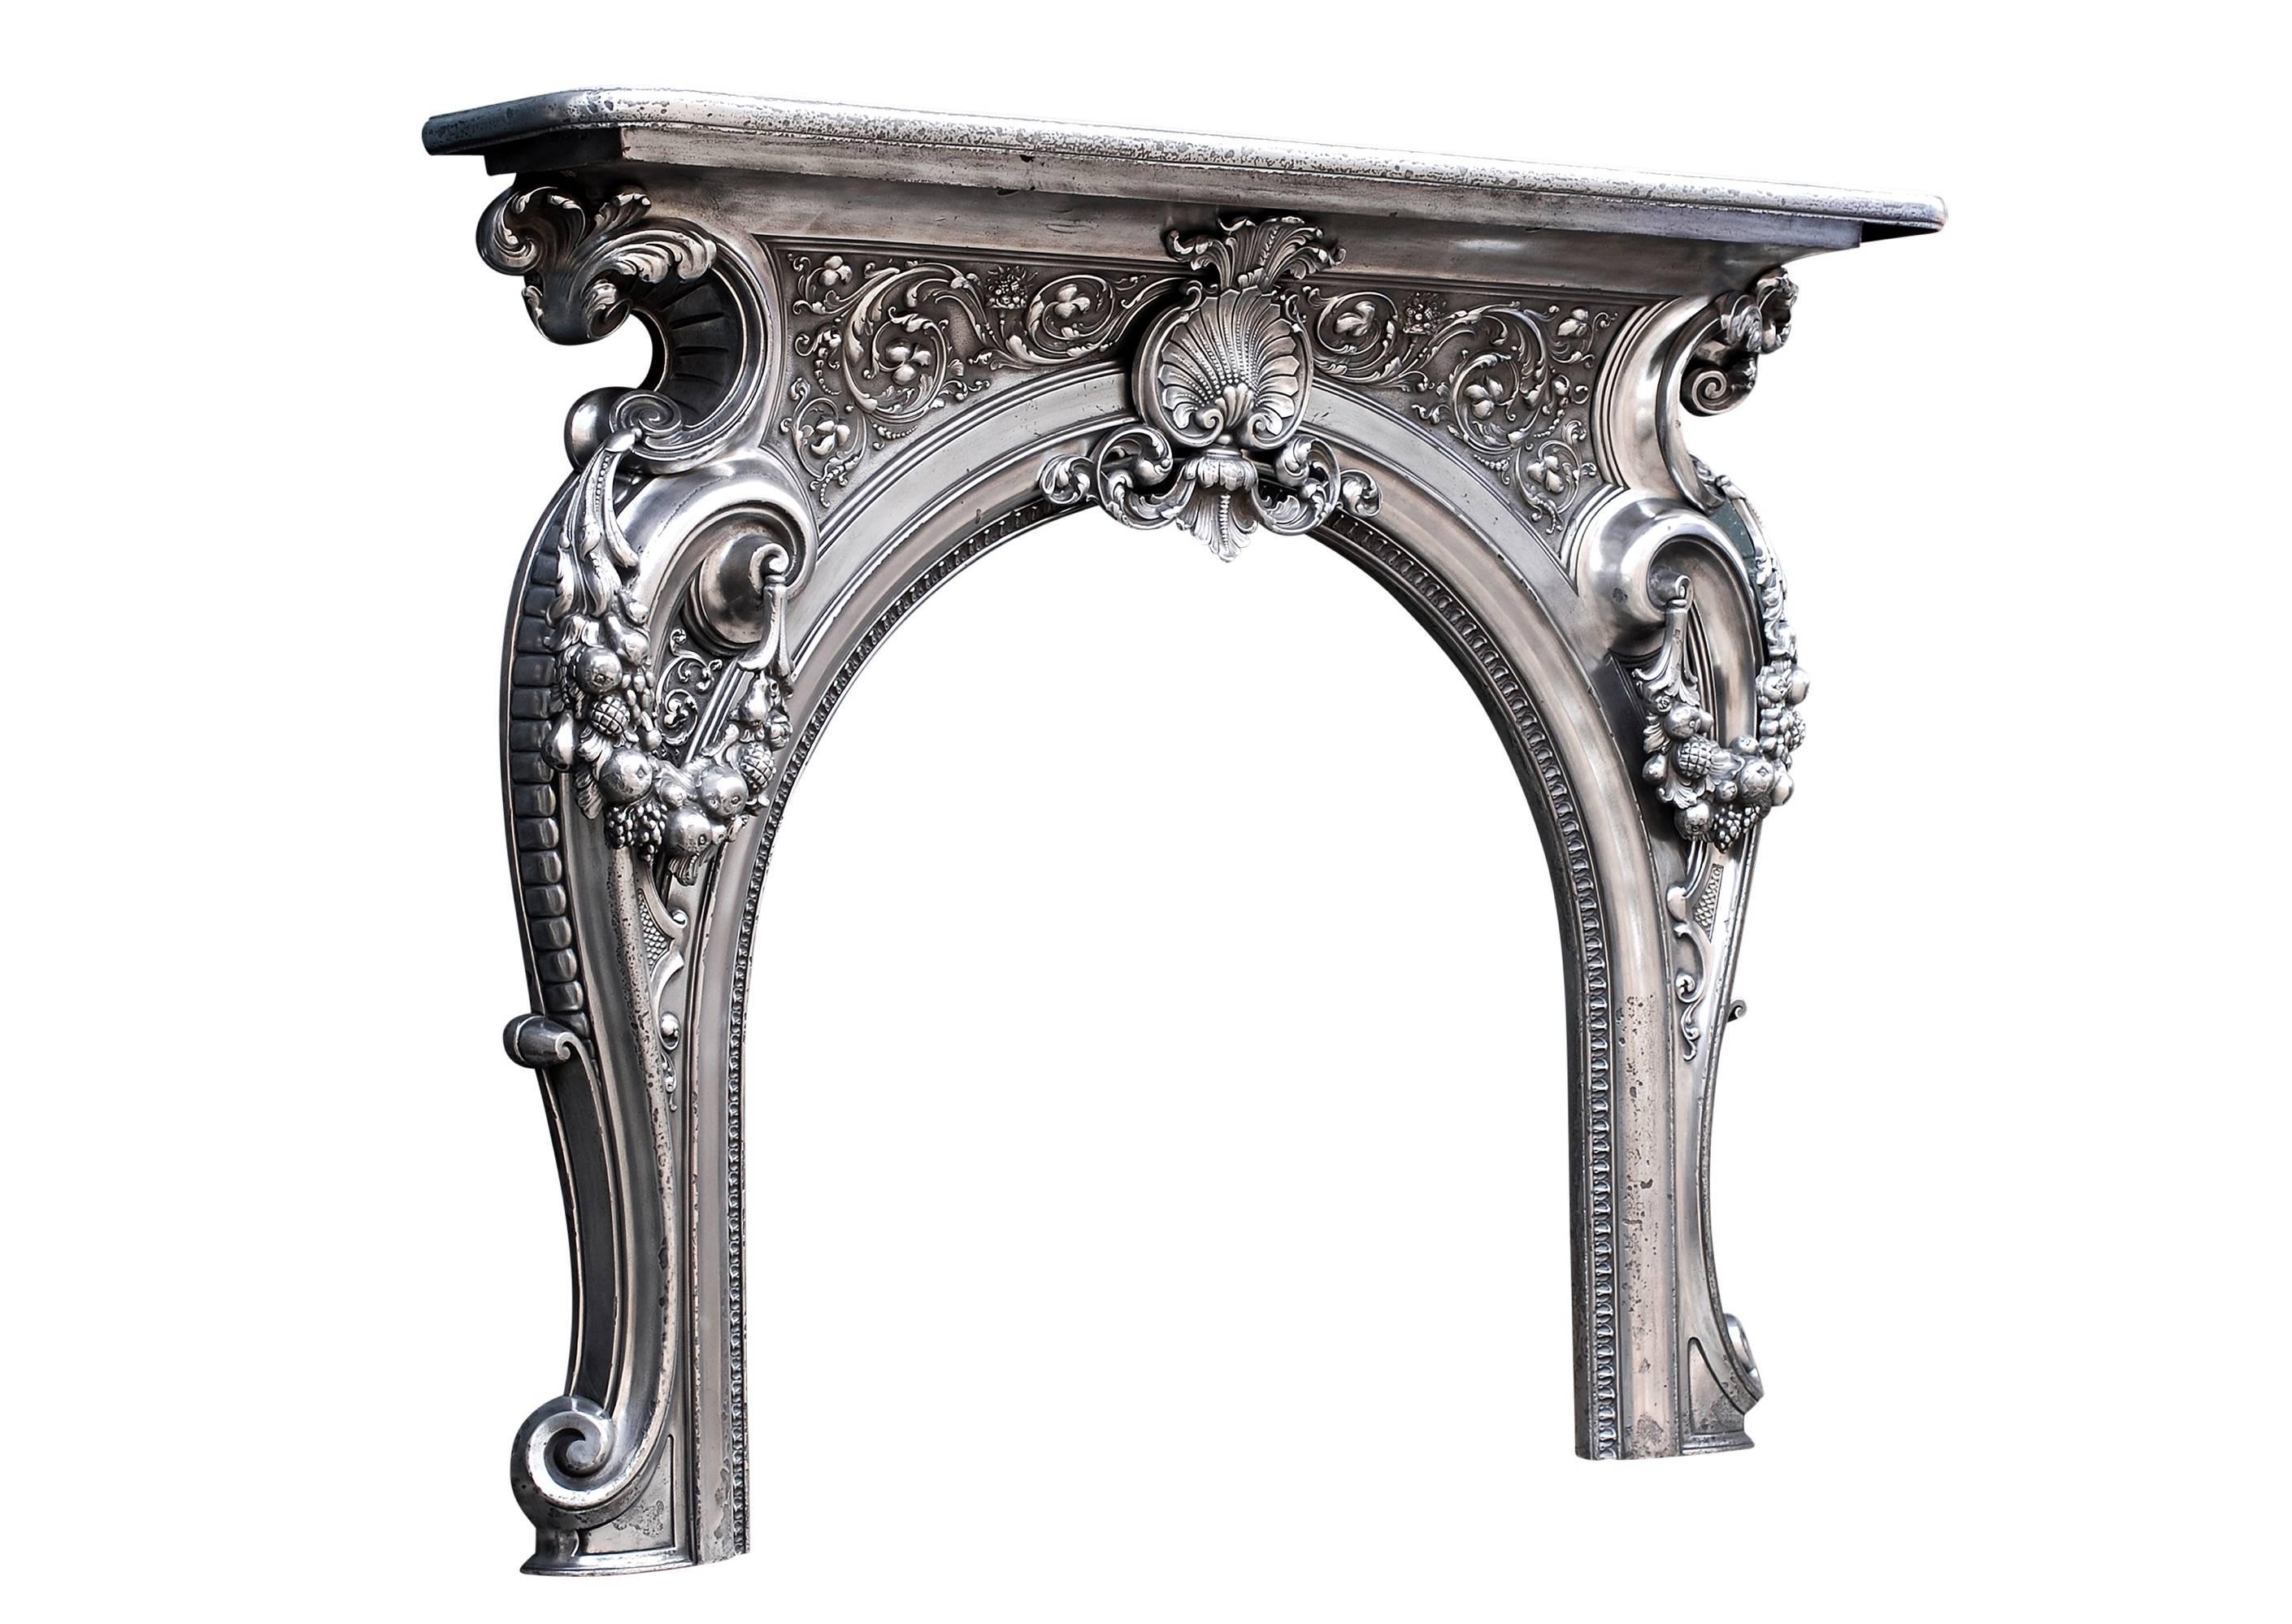 An ornate 19th century French cast iron fireplace. The large shell to centre with leafwork and scrolls to either side, the legs draped with festoons of foliage and fruit with intricate moulding to arched opening.

Measurements:
Shelf Width:	1570 mm 